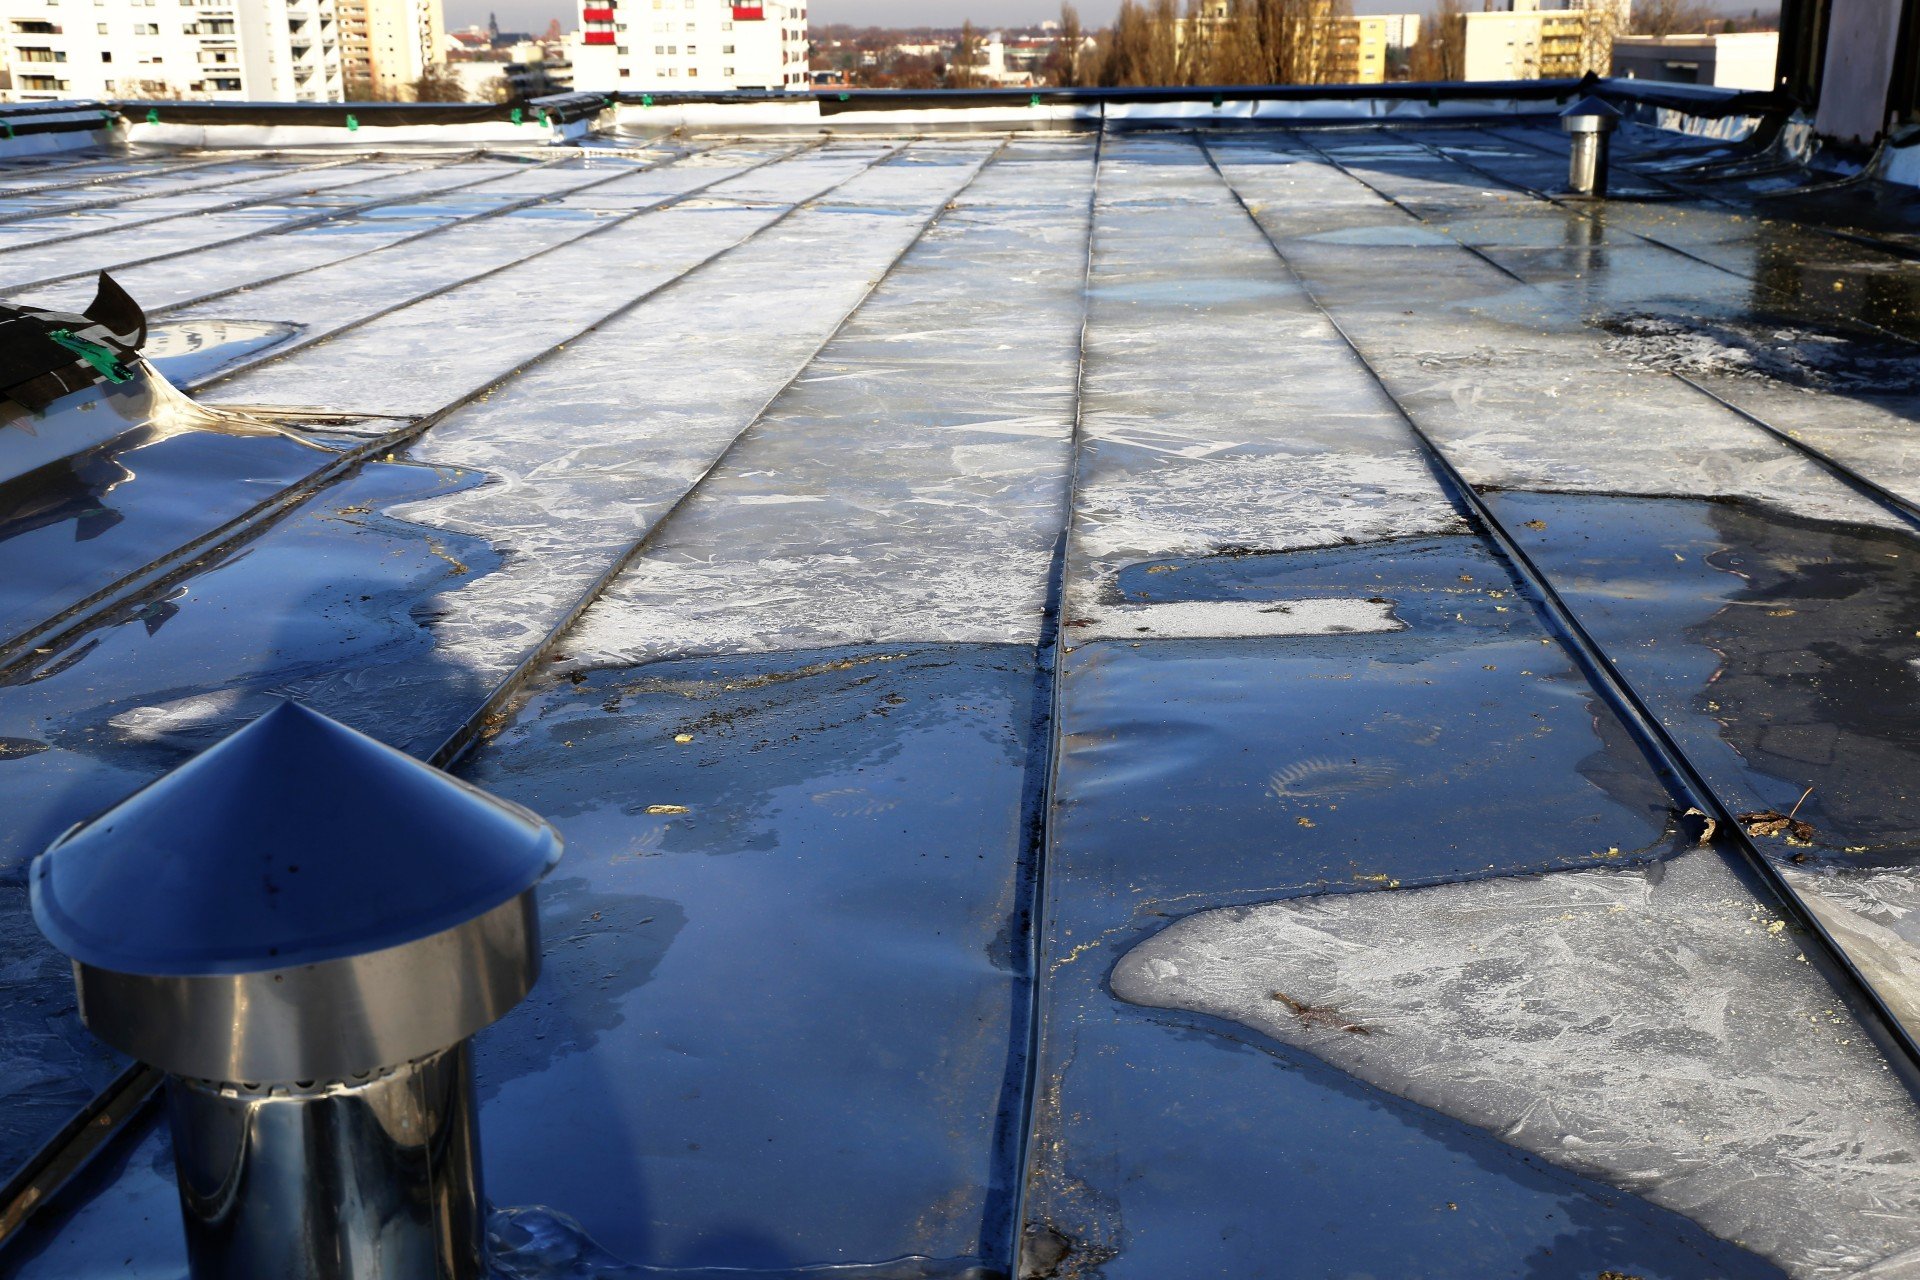 What Is The Average Lifespan Of A Commercial Roof?